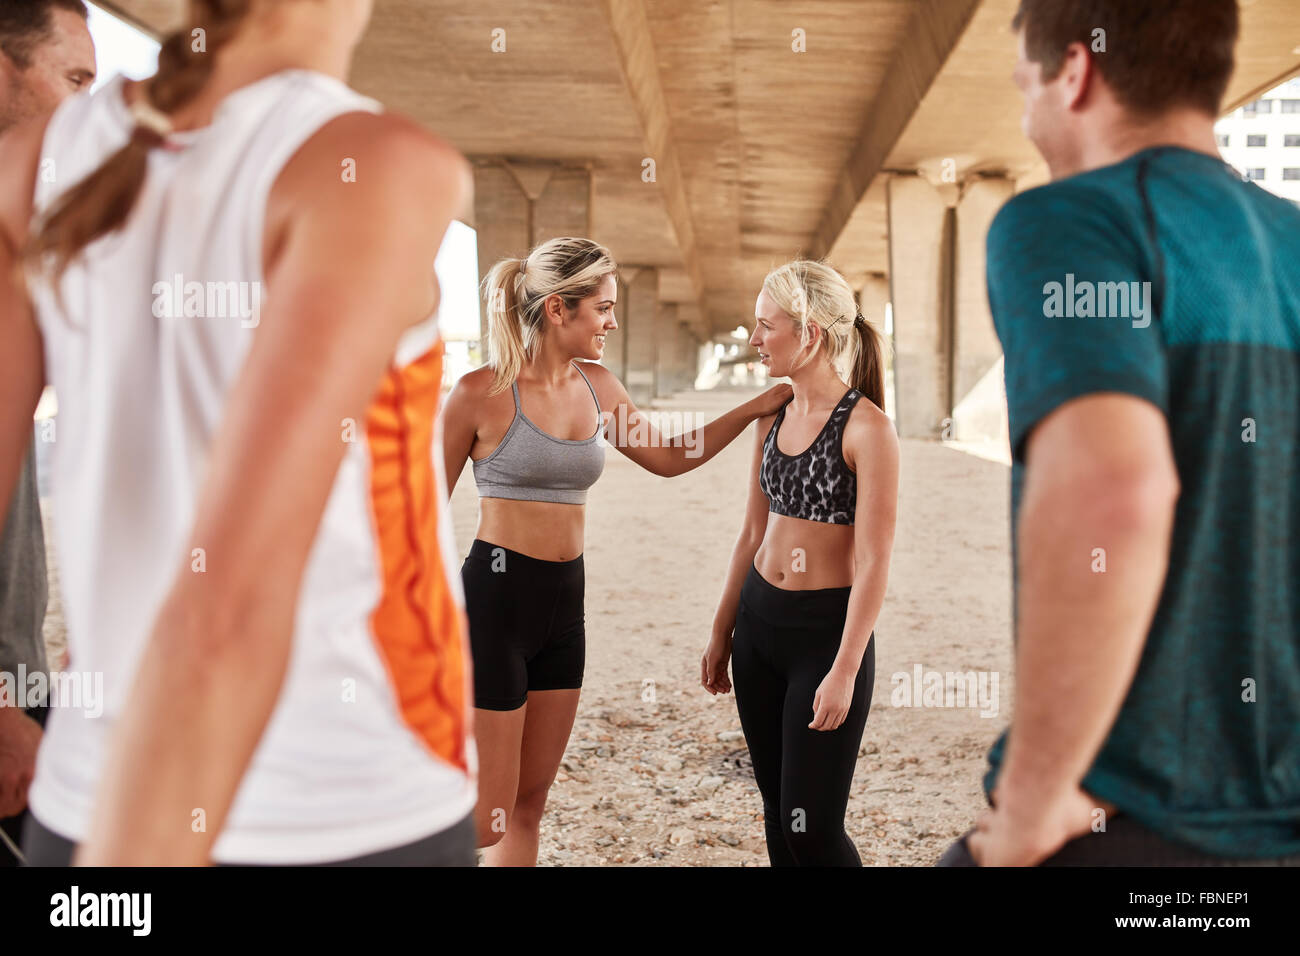 Young people taking break in running training. Athletes relaxing and talking after a morning run. Stock Photo